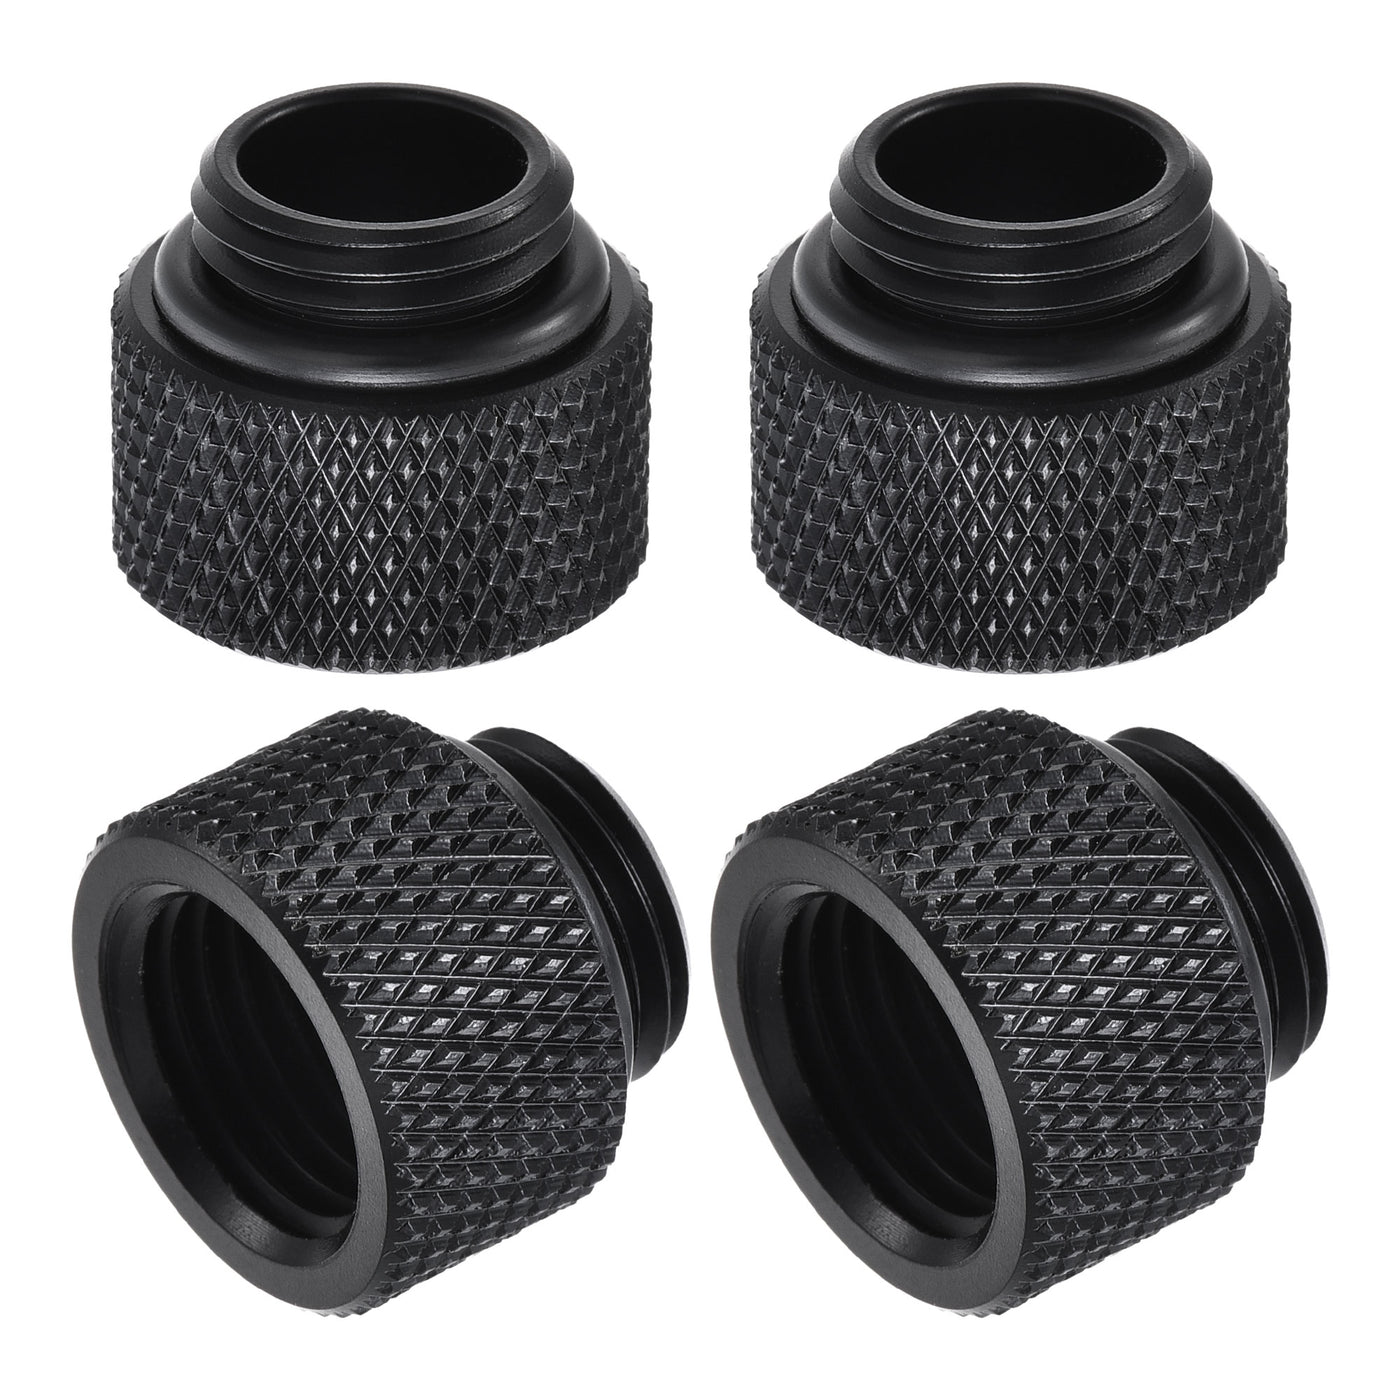 uxcell Uxcell Male to Female Extender Fitting G1/4 x 10mm for Water Cooling System Black 4pcs